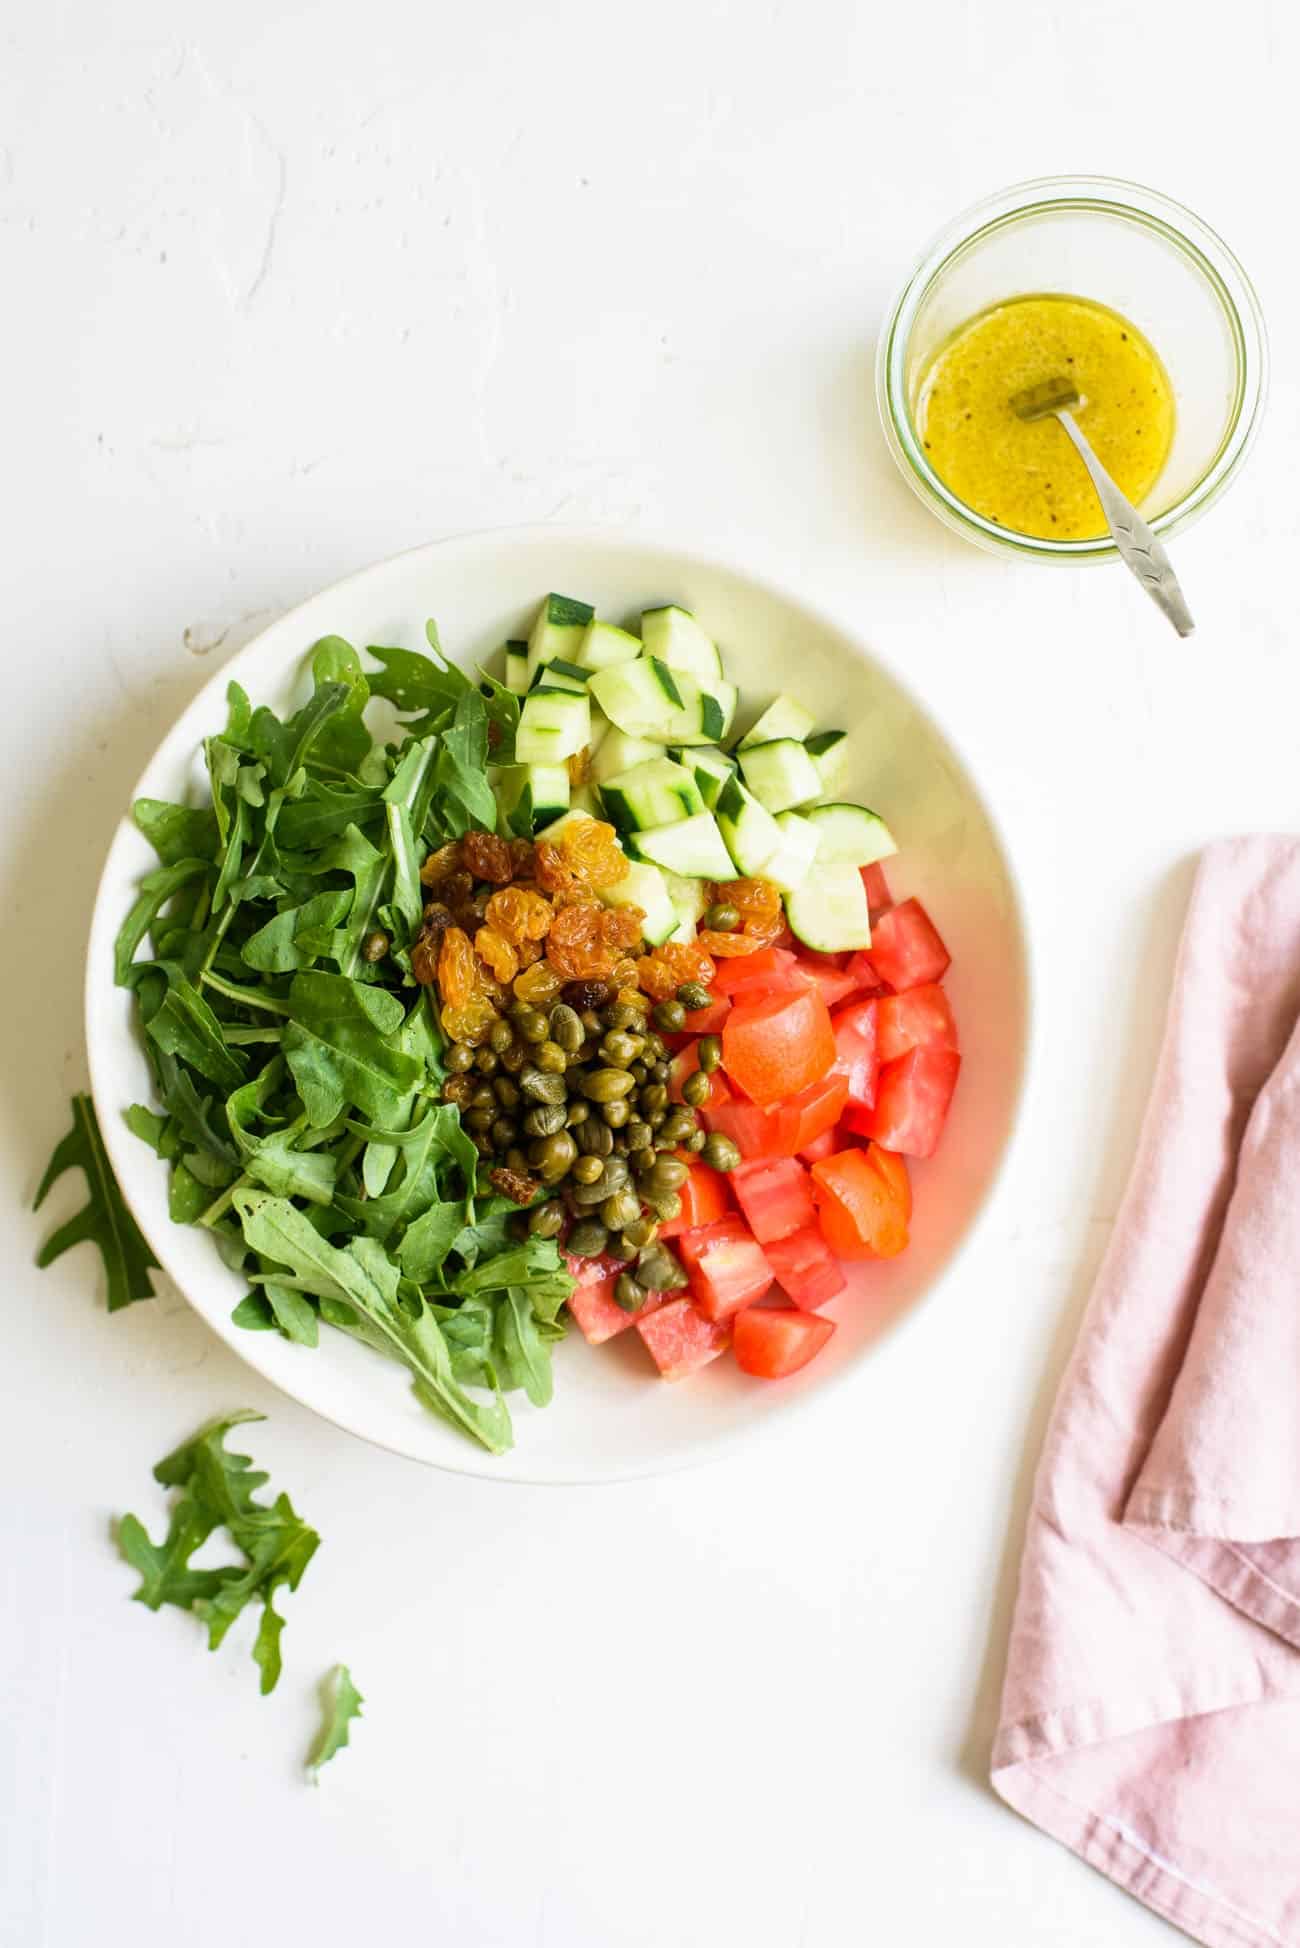 Ingredients to make a summer farro salad in a white bowl: arugula, cucumbers, tomatoes, capers, and raisins